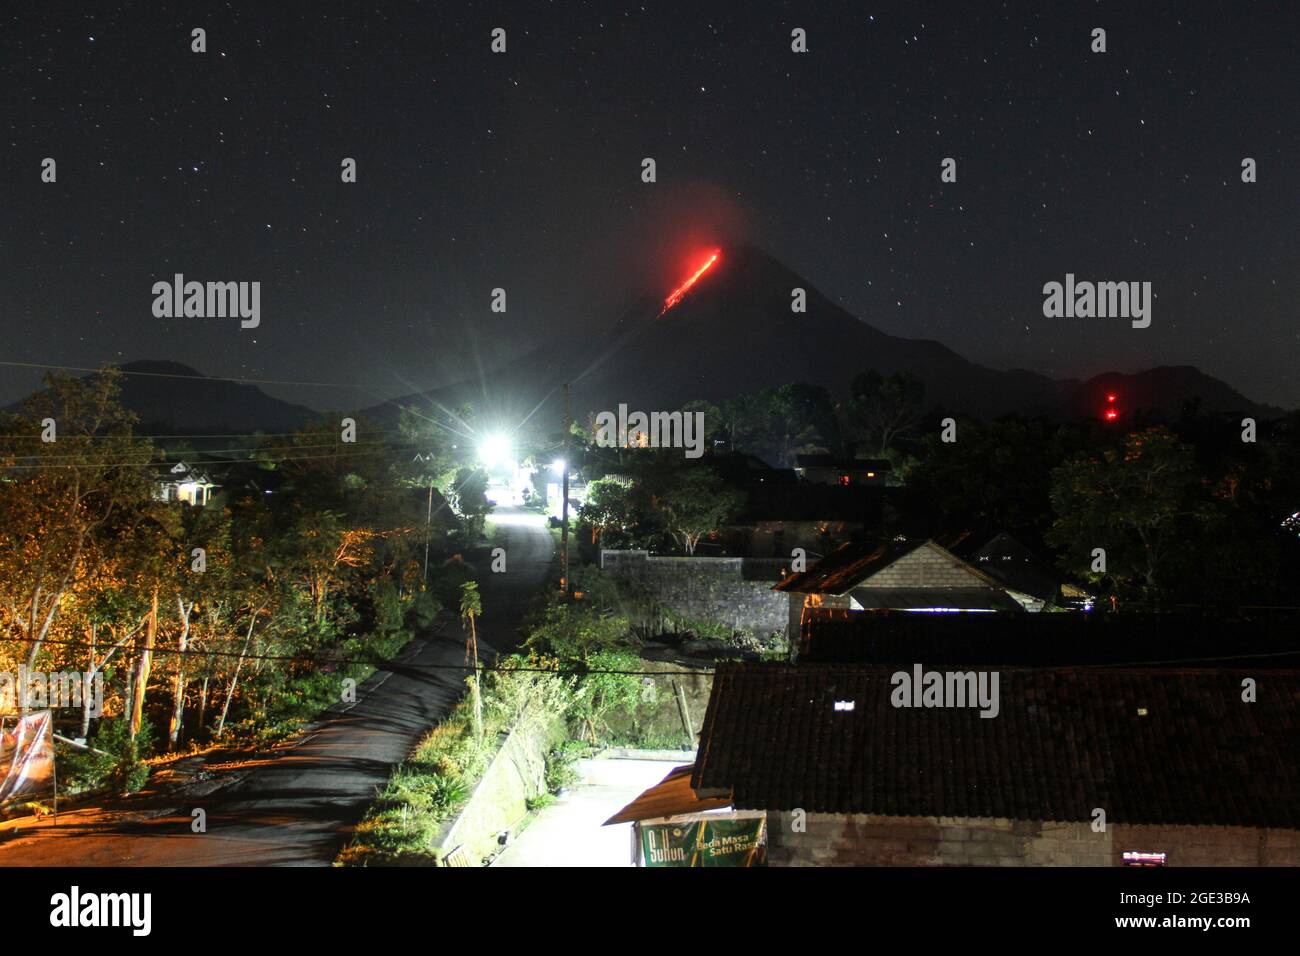 Sleman, Yogyakarta, Indonesia. 12th Aug, 2021. Mount Merapi is seen emitting hot reddish lava seen in Sleman, Yogyakarta, Indonesia, on August 11, 2021. Head of the Geological Disaster Technology Research and Development Center (BPPTKG) Hanik Humaida stated that Mount Merapi had erupted and caused 3,500 meters of hot clouds and ash rain on Monday, August 16, 2021. Mount Merapi erupted violently in 2010 and killed more than 300 people. (Credit Image: © Slamet Riyadi/ZUMA Press Wire) Stock Photo